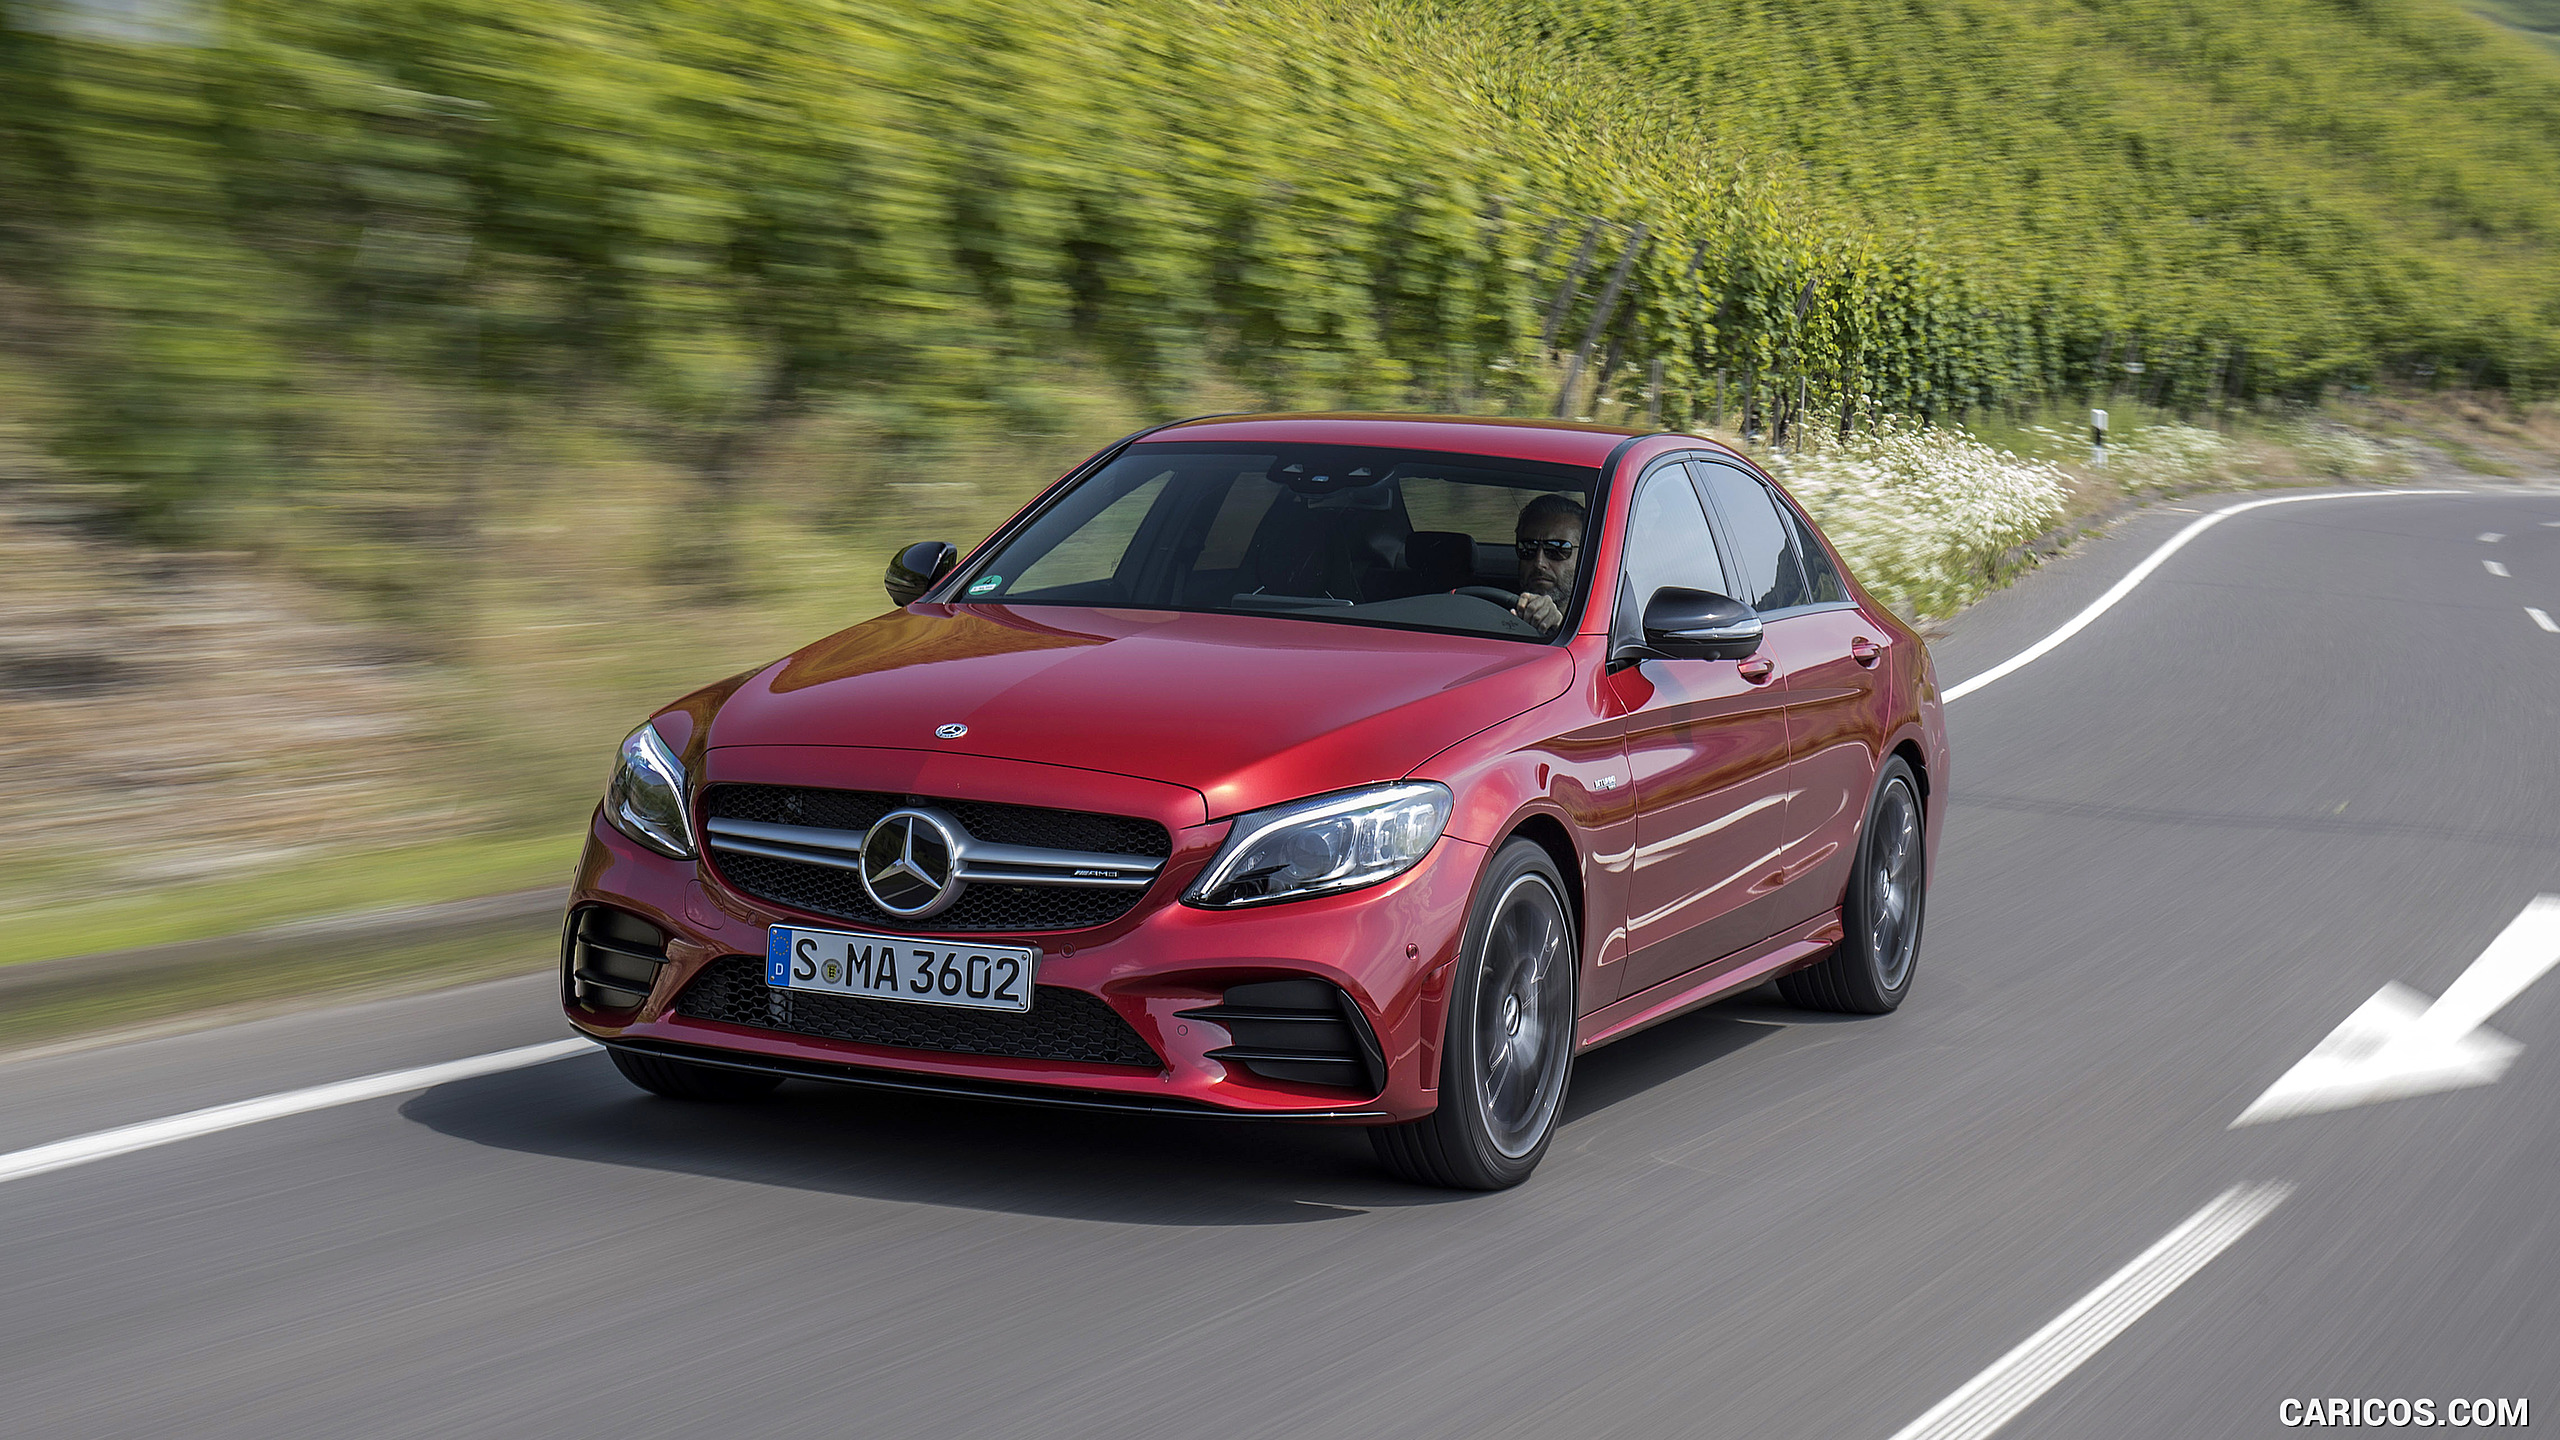 2019 Mercedes-AMG C43 4MATIC Sedan (Color: Hyacinth Red) - Front Three-Quarter, #35 of 192